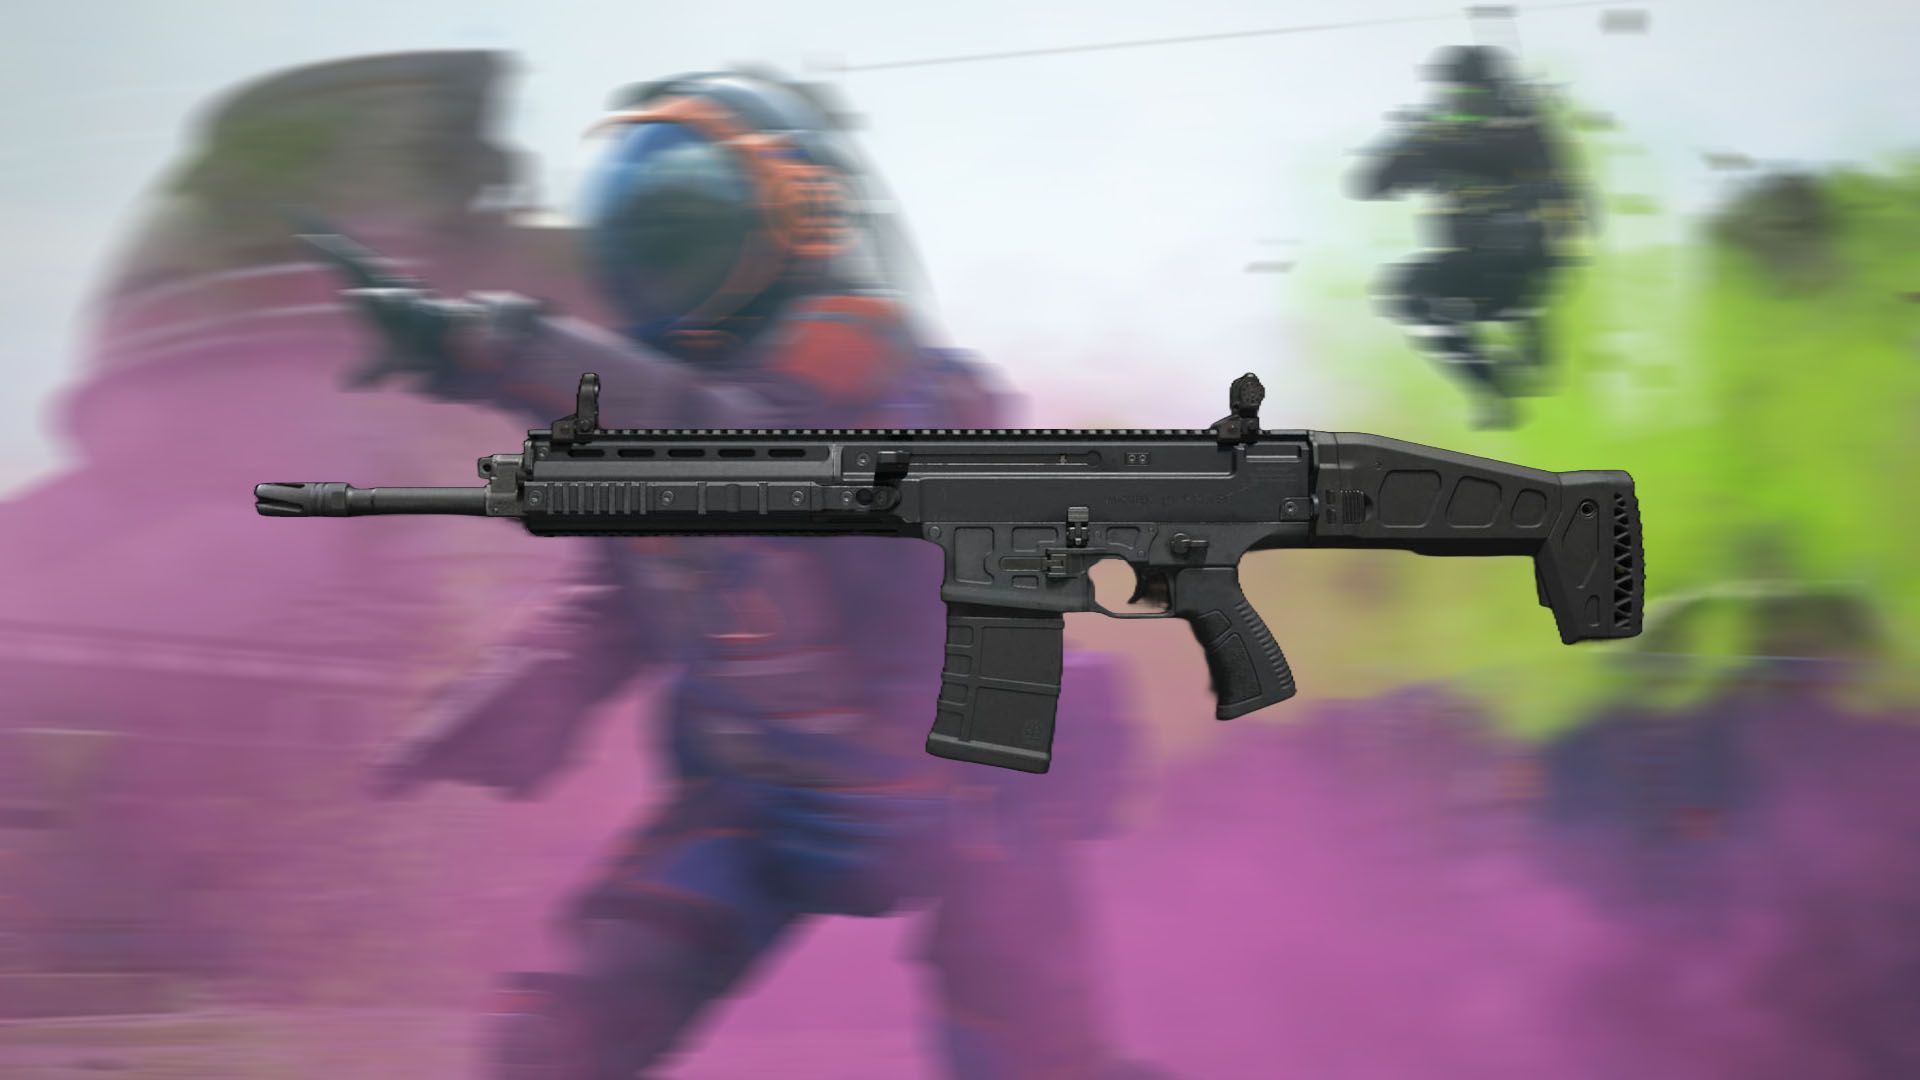 Warzone MTZ 762 assault rifle on blurred purple and green background featuring Warzone players